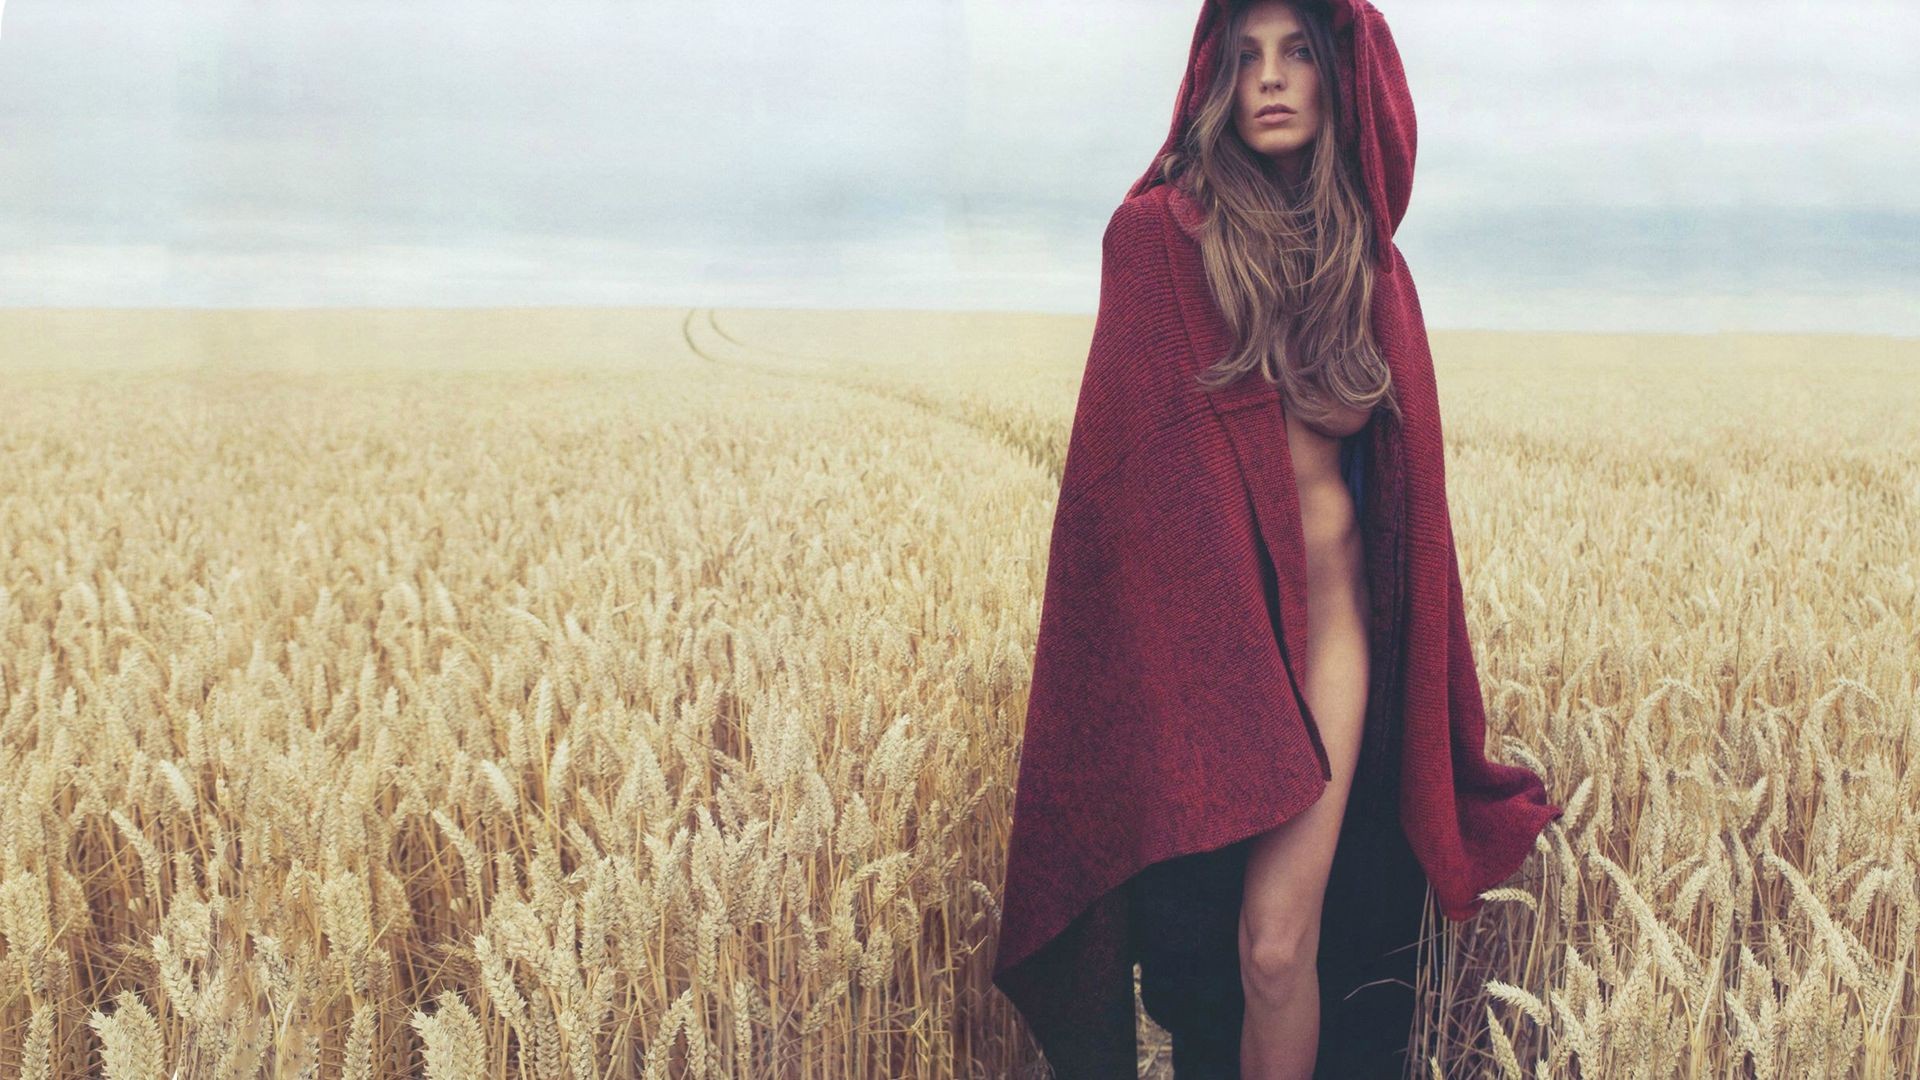 People 1920x1080 women Little Red Riding Hood field strategic covering hoods women outdoors hair covering boobs outdoors plants Agro (Plants) long hair hair over nipples landscape model partially clothed cape naked cape